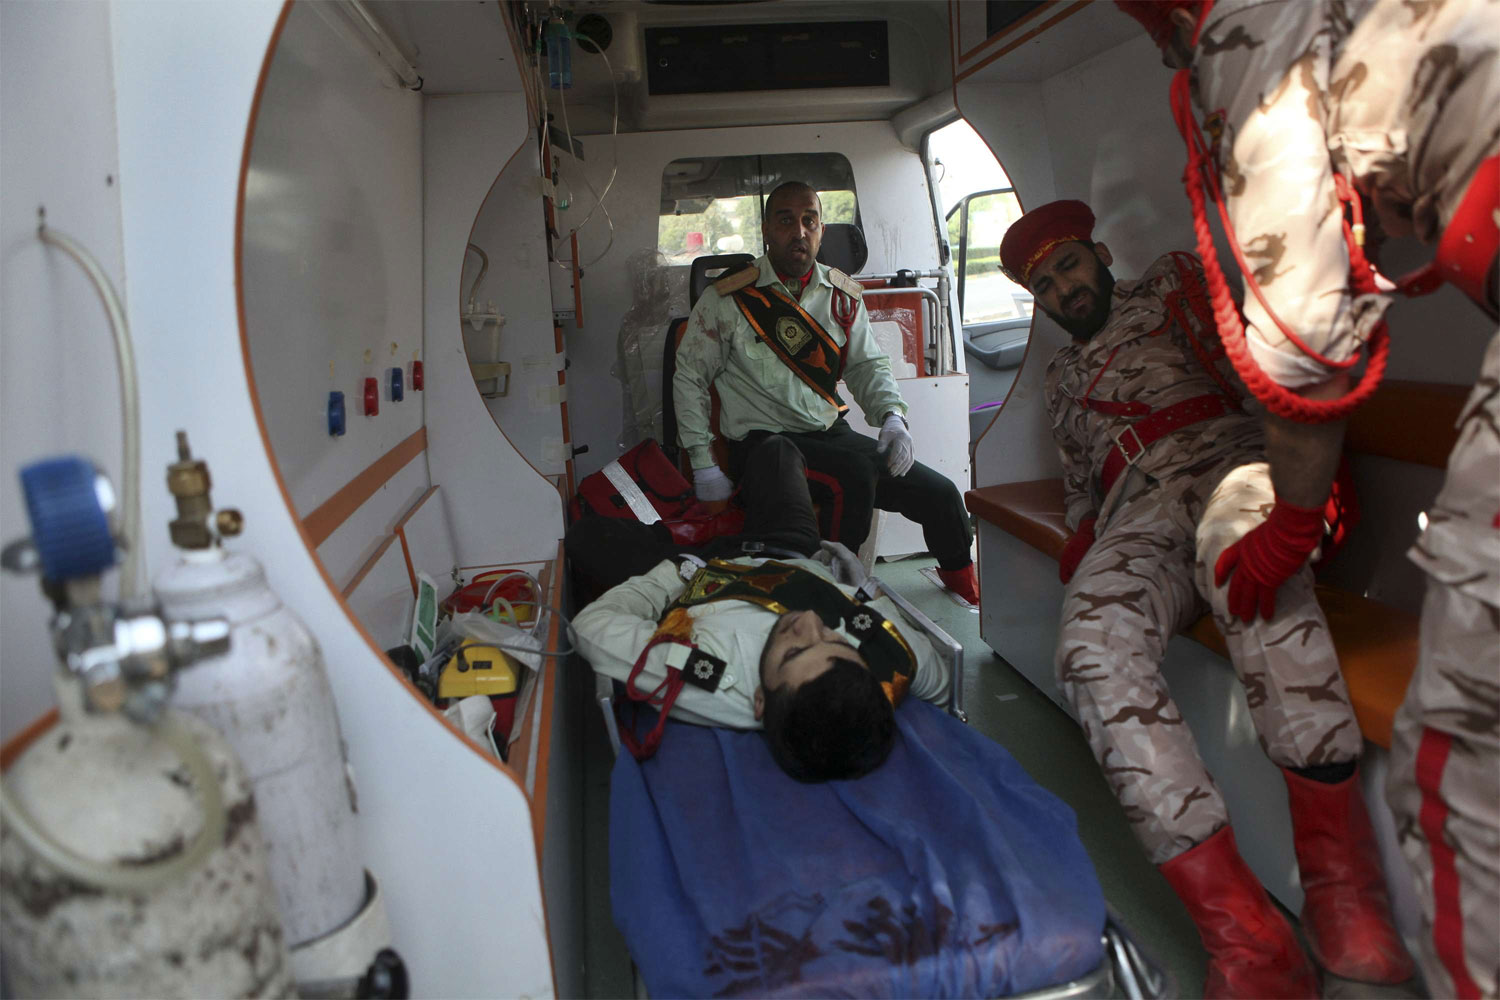 Wounded military personnel are carried into an ambulance after the shooting